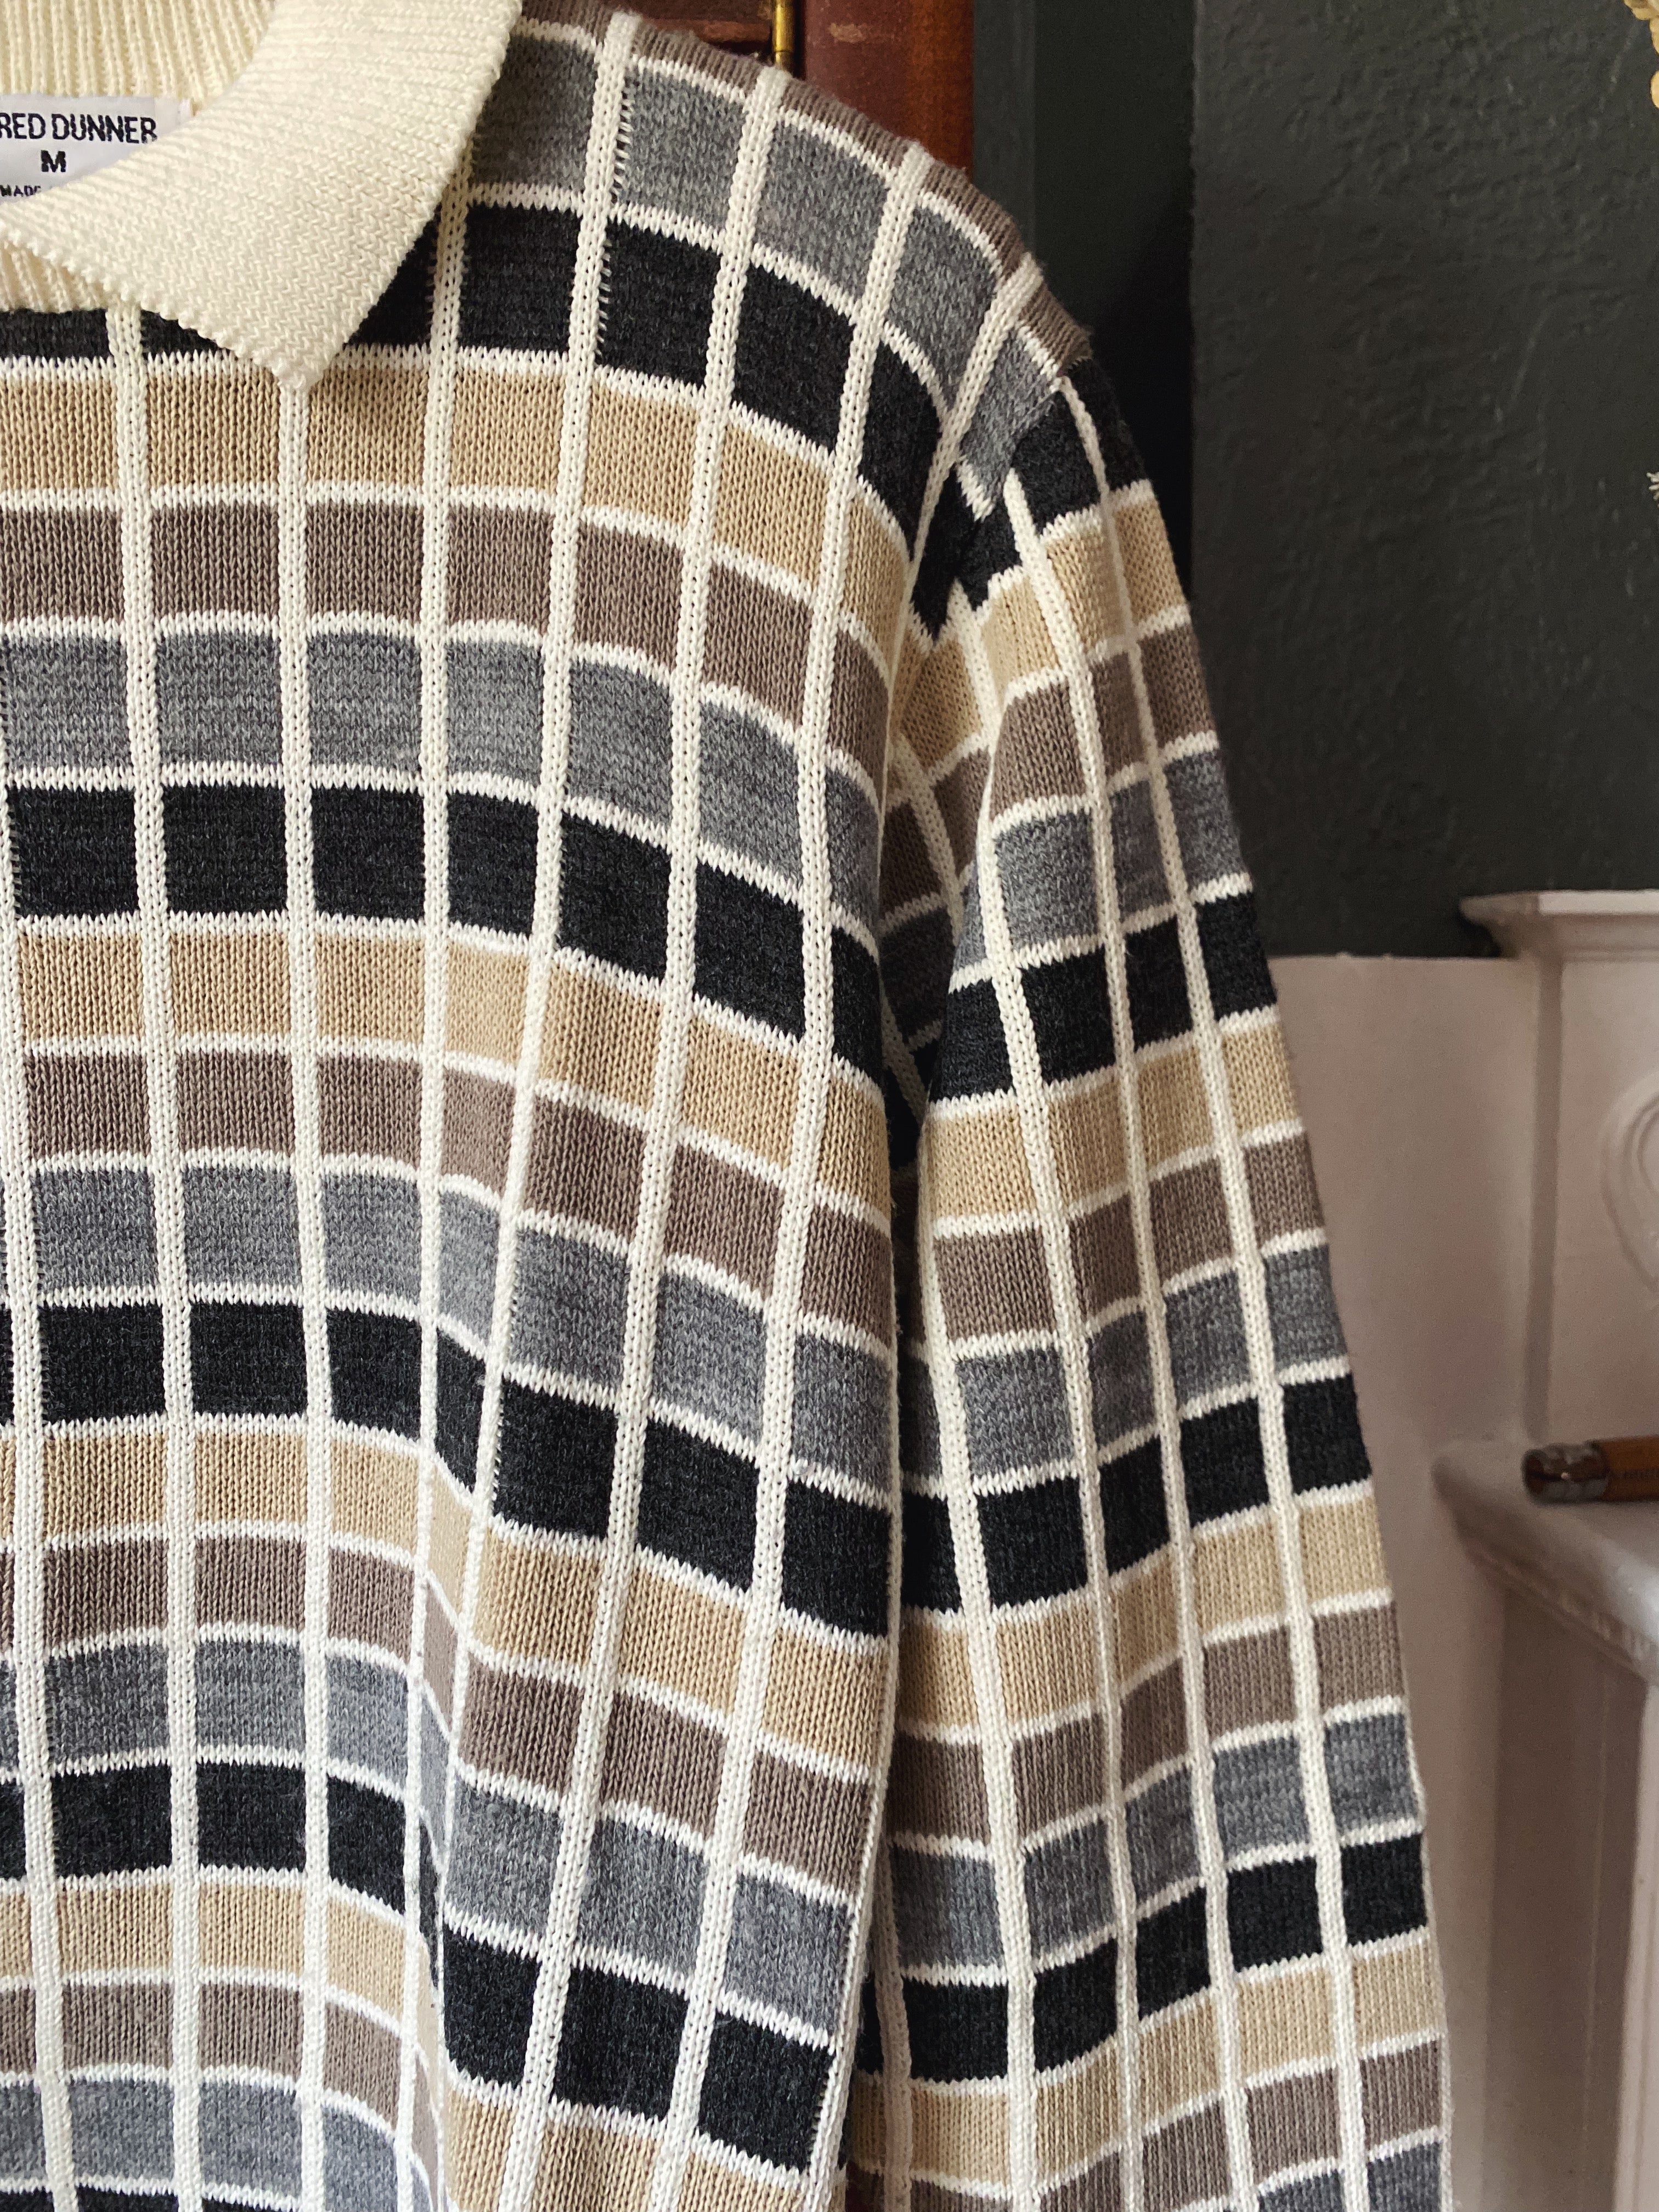 80s Graphic Collared Sweater Made in USA